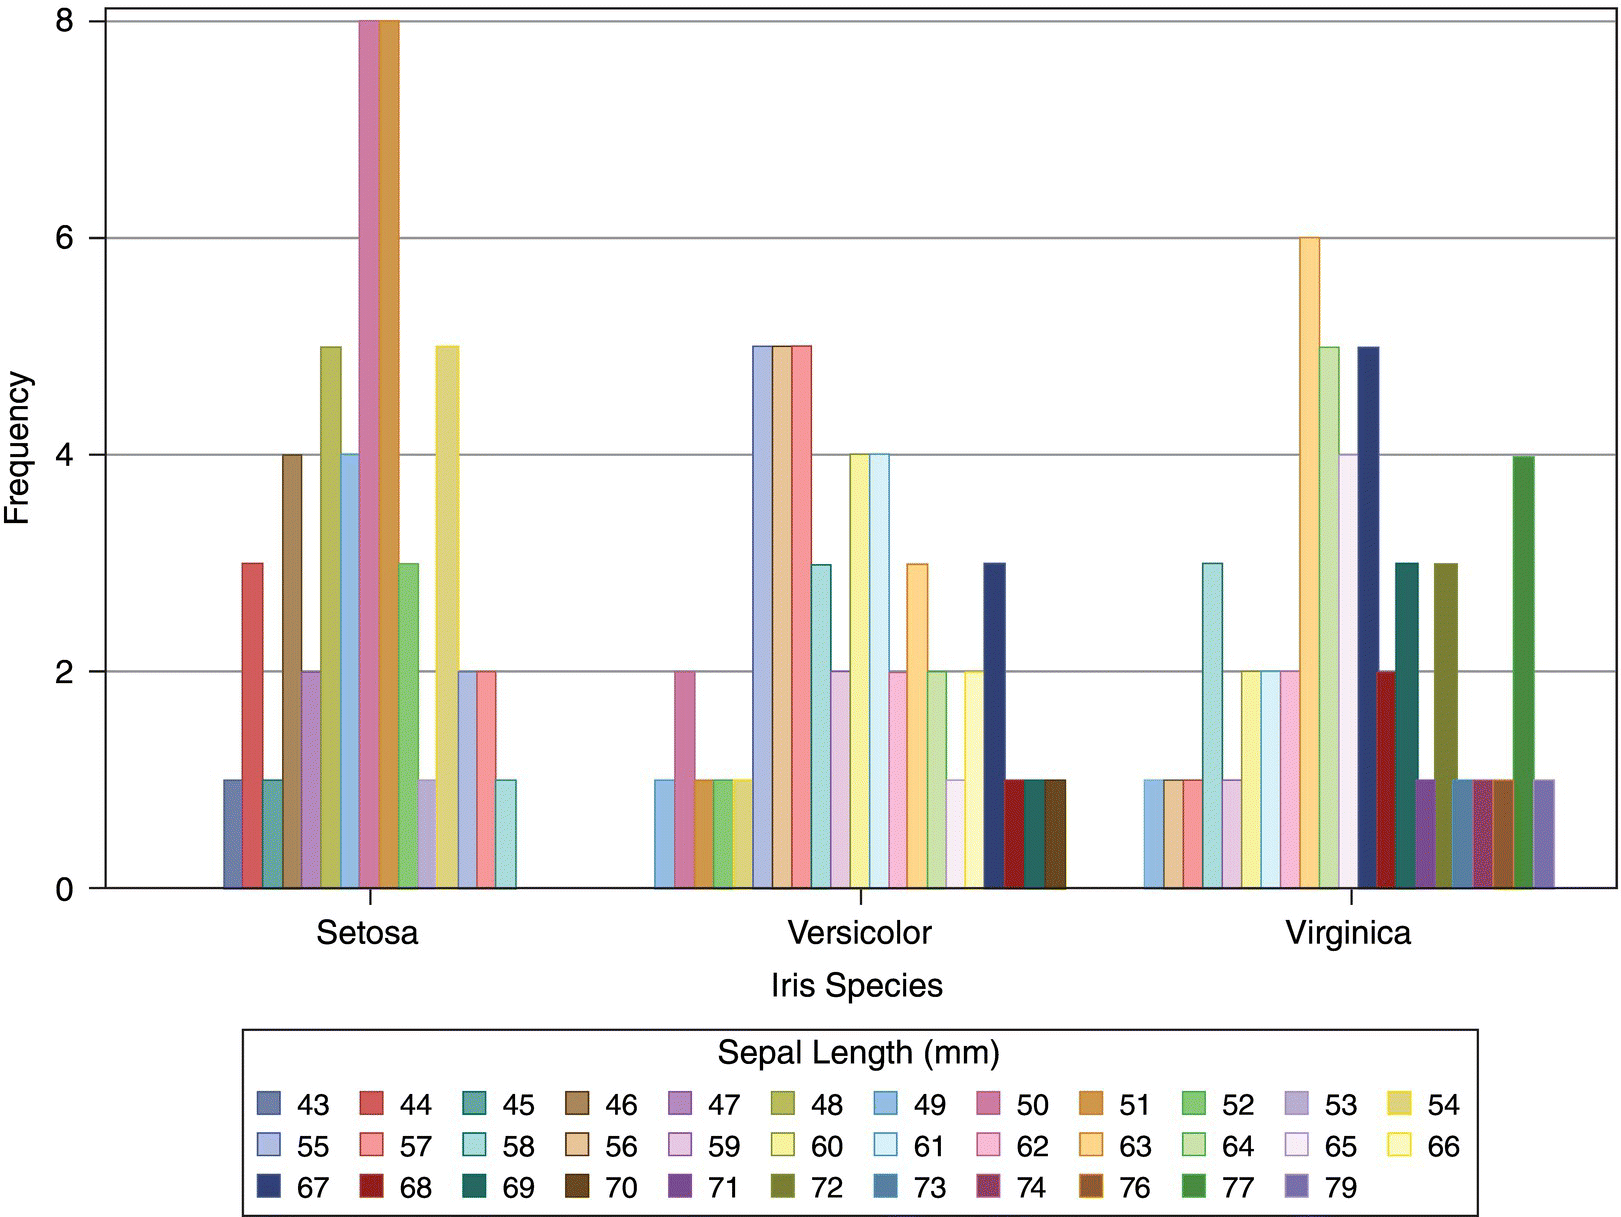 Bar chart in SAS displaying 3 clusters of bars for three Iris species: setosa (left), versicolor (middle), and virginica (right). Legend box at the bottom displays the shades for various sepal lengths.